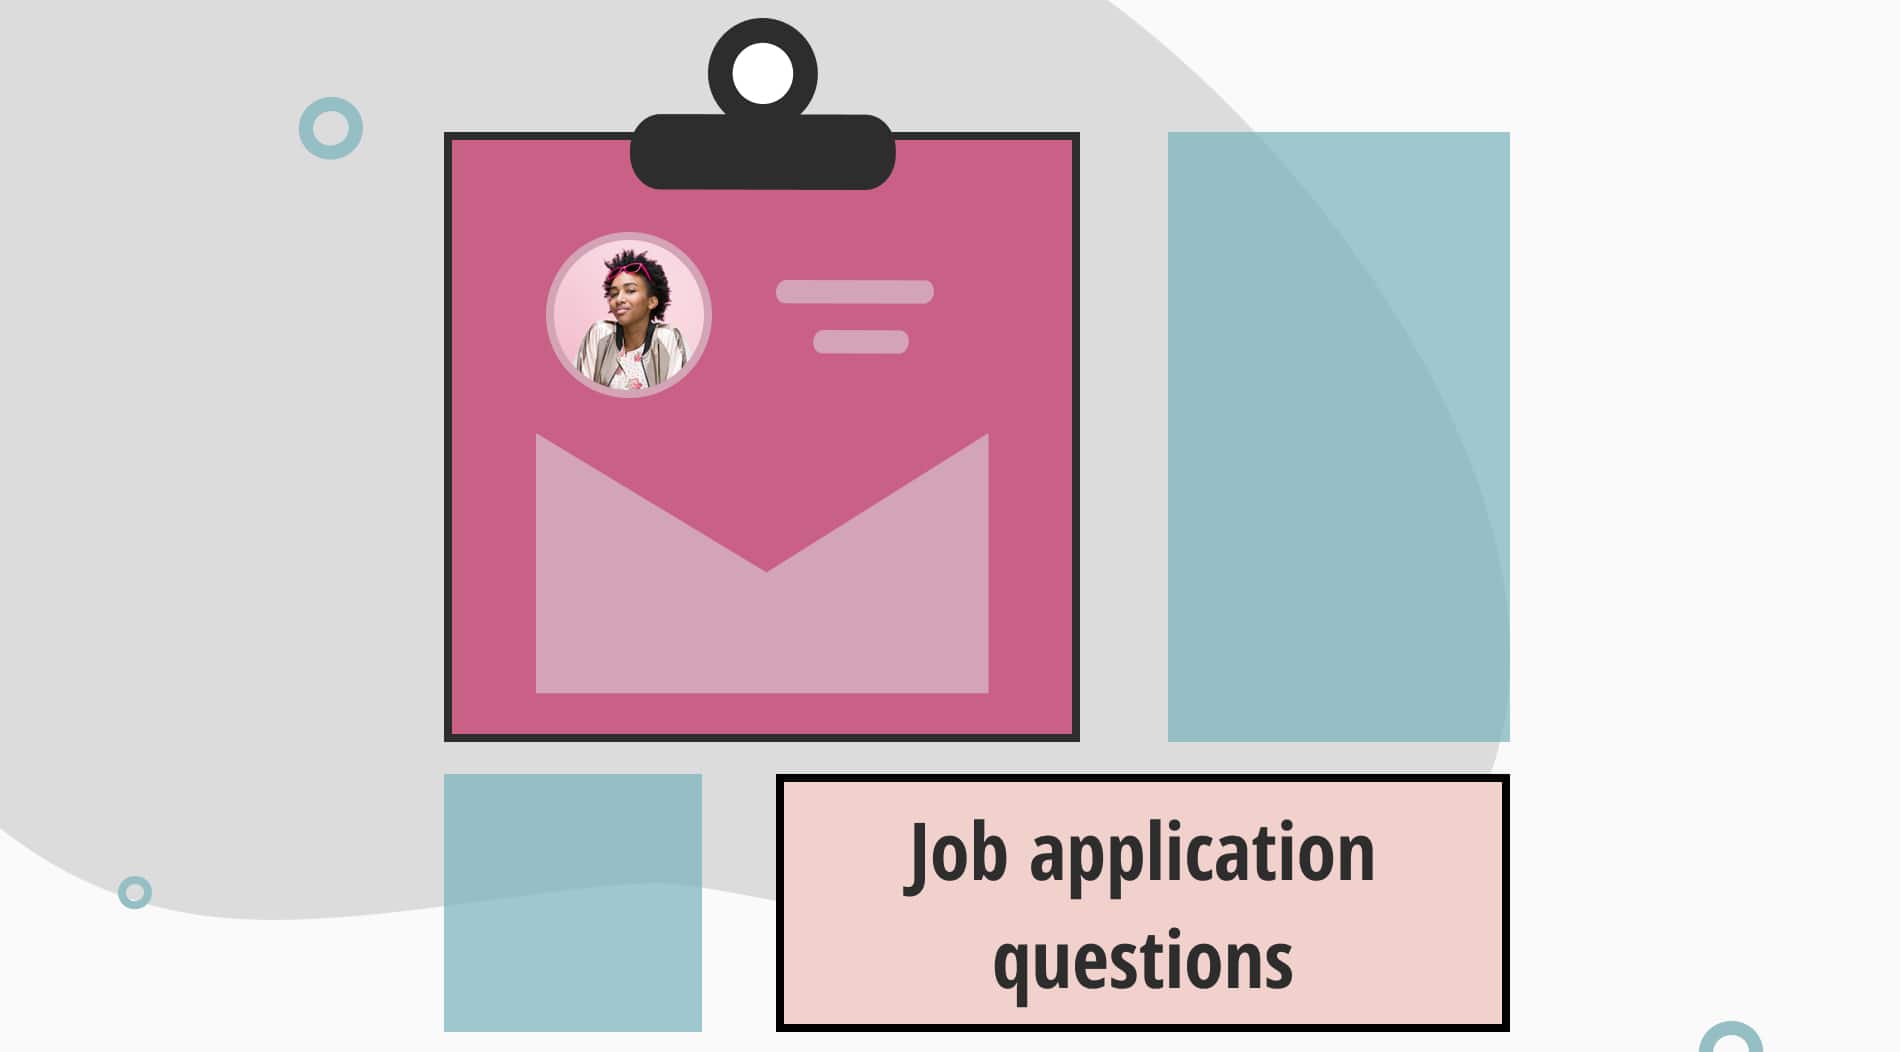 60+ Job application questions for interviewers